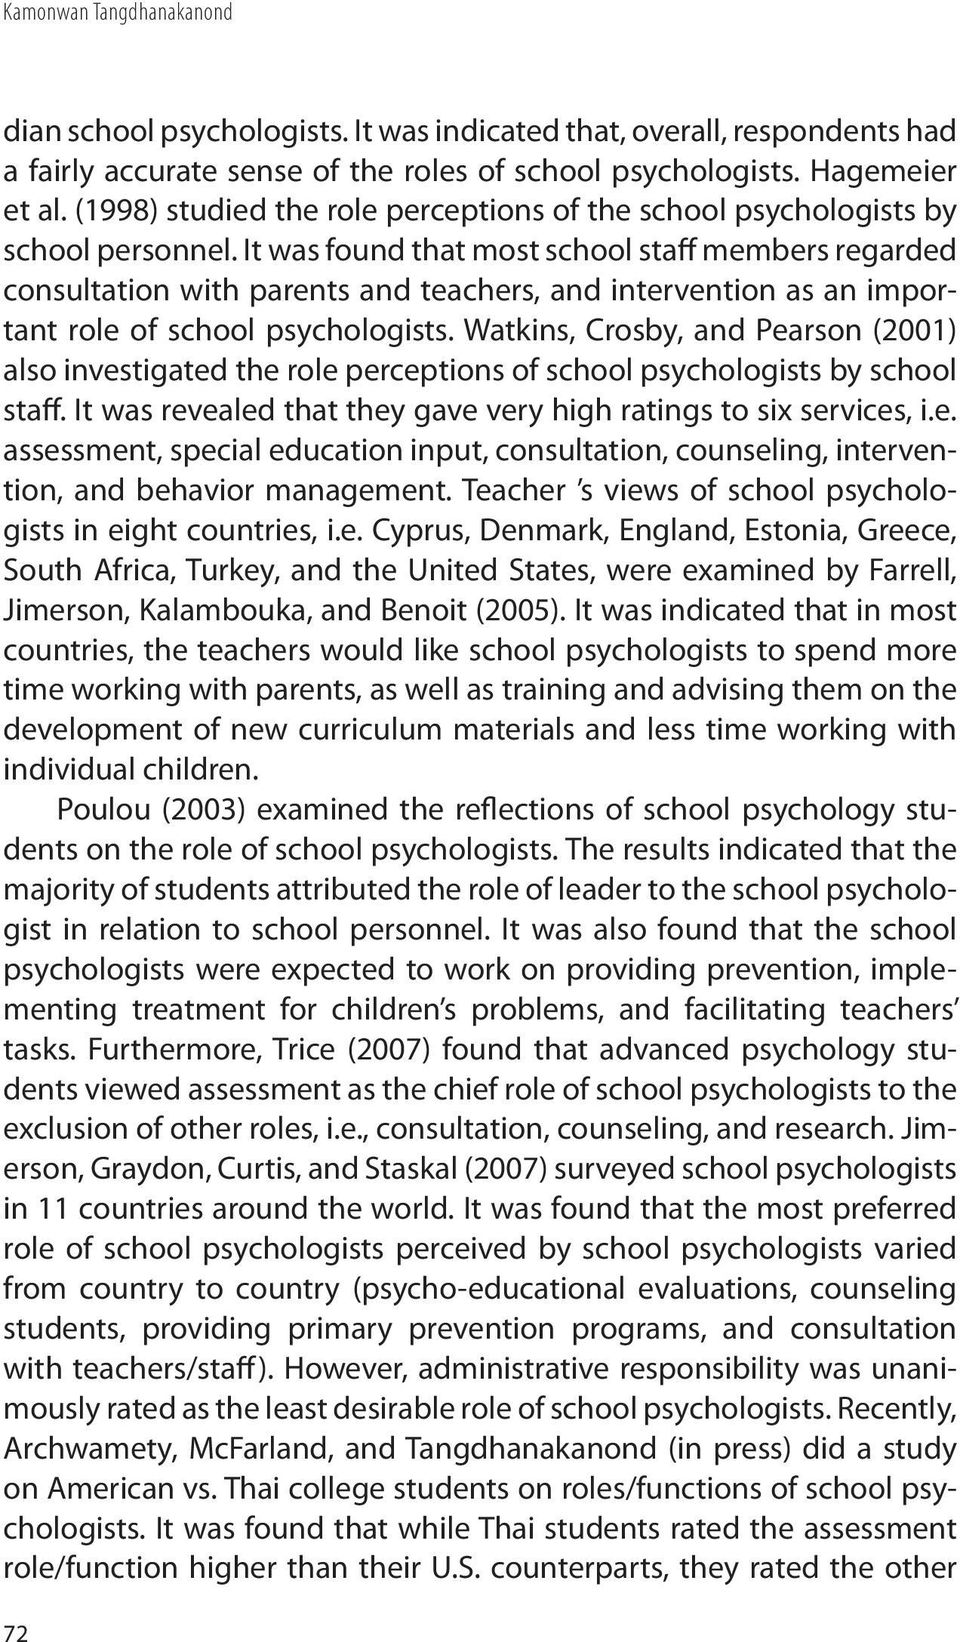 It was found that most school staff members regarded consultation with parents and teachers, and intervention as an important role of school psychologists.